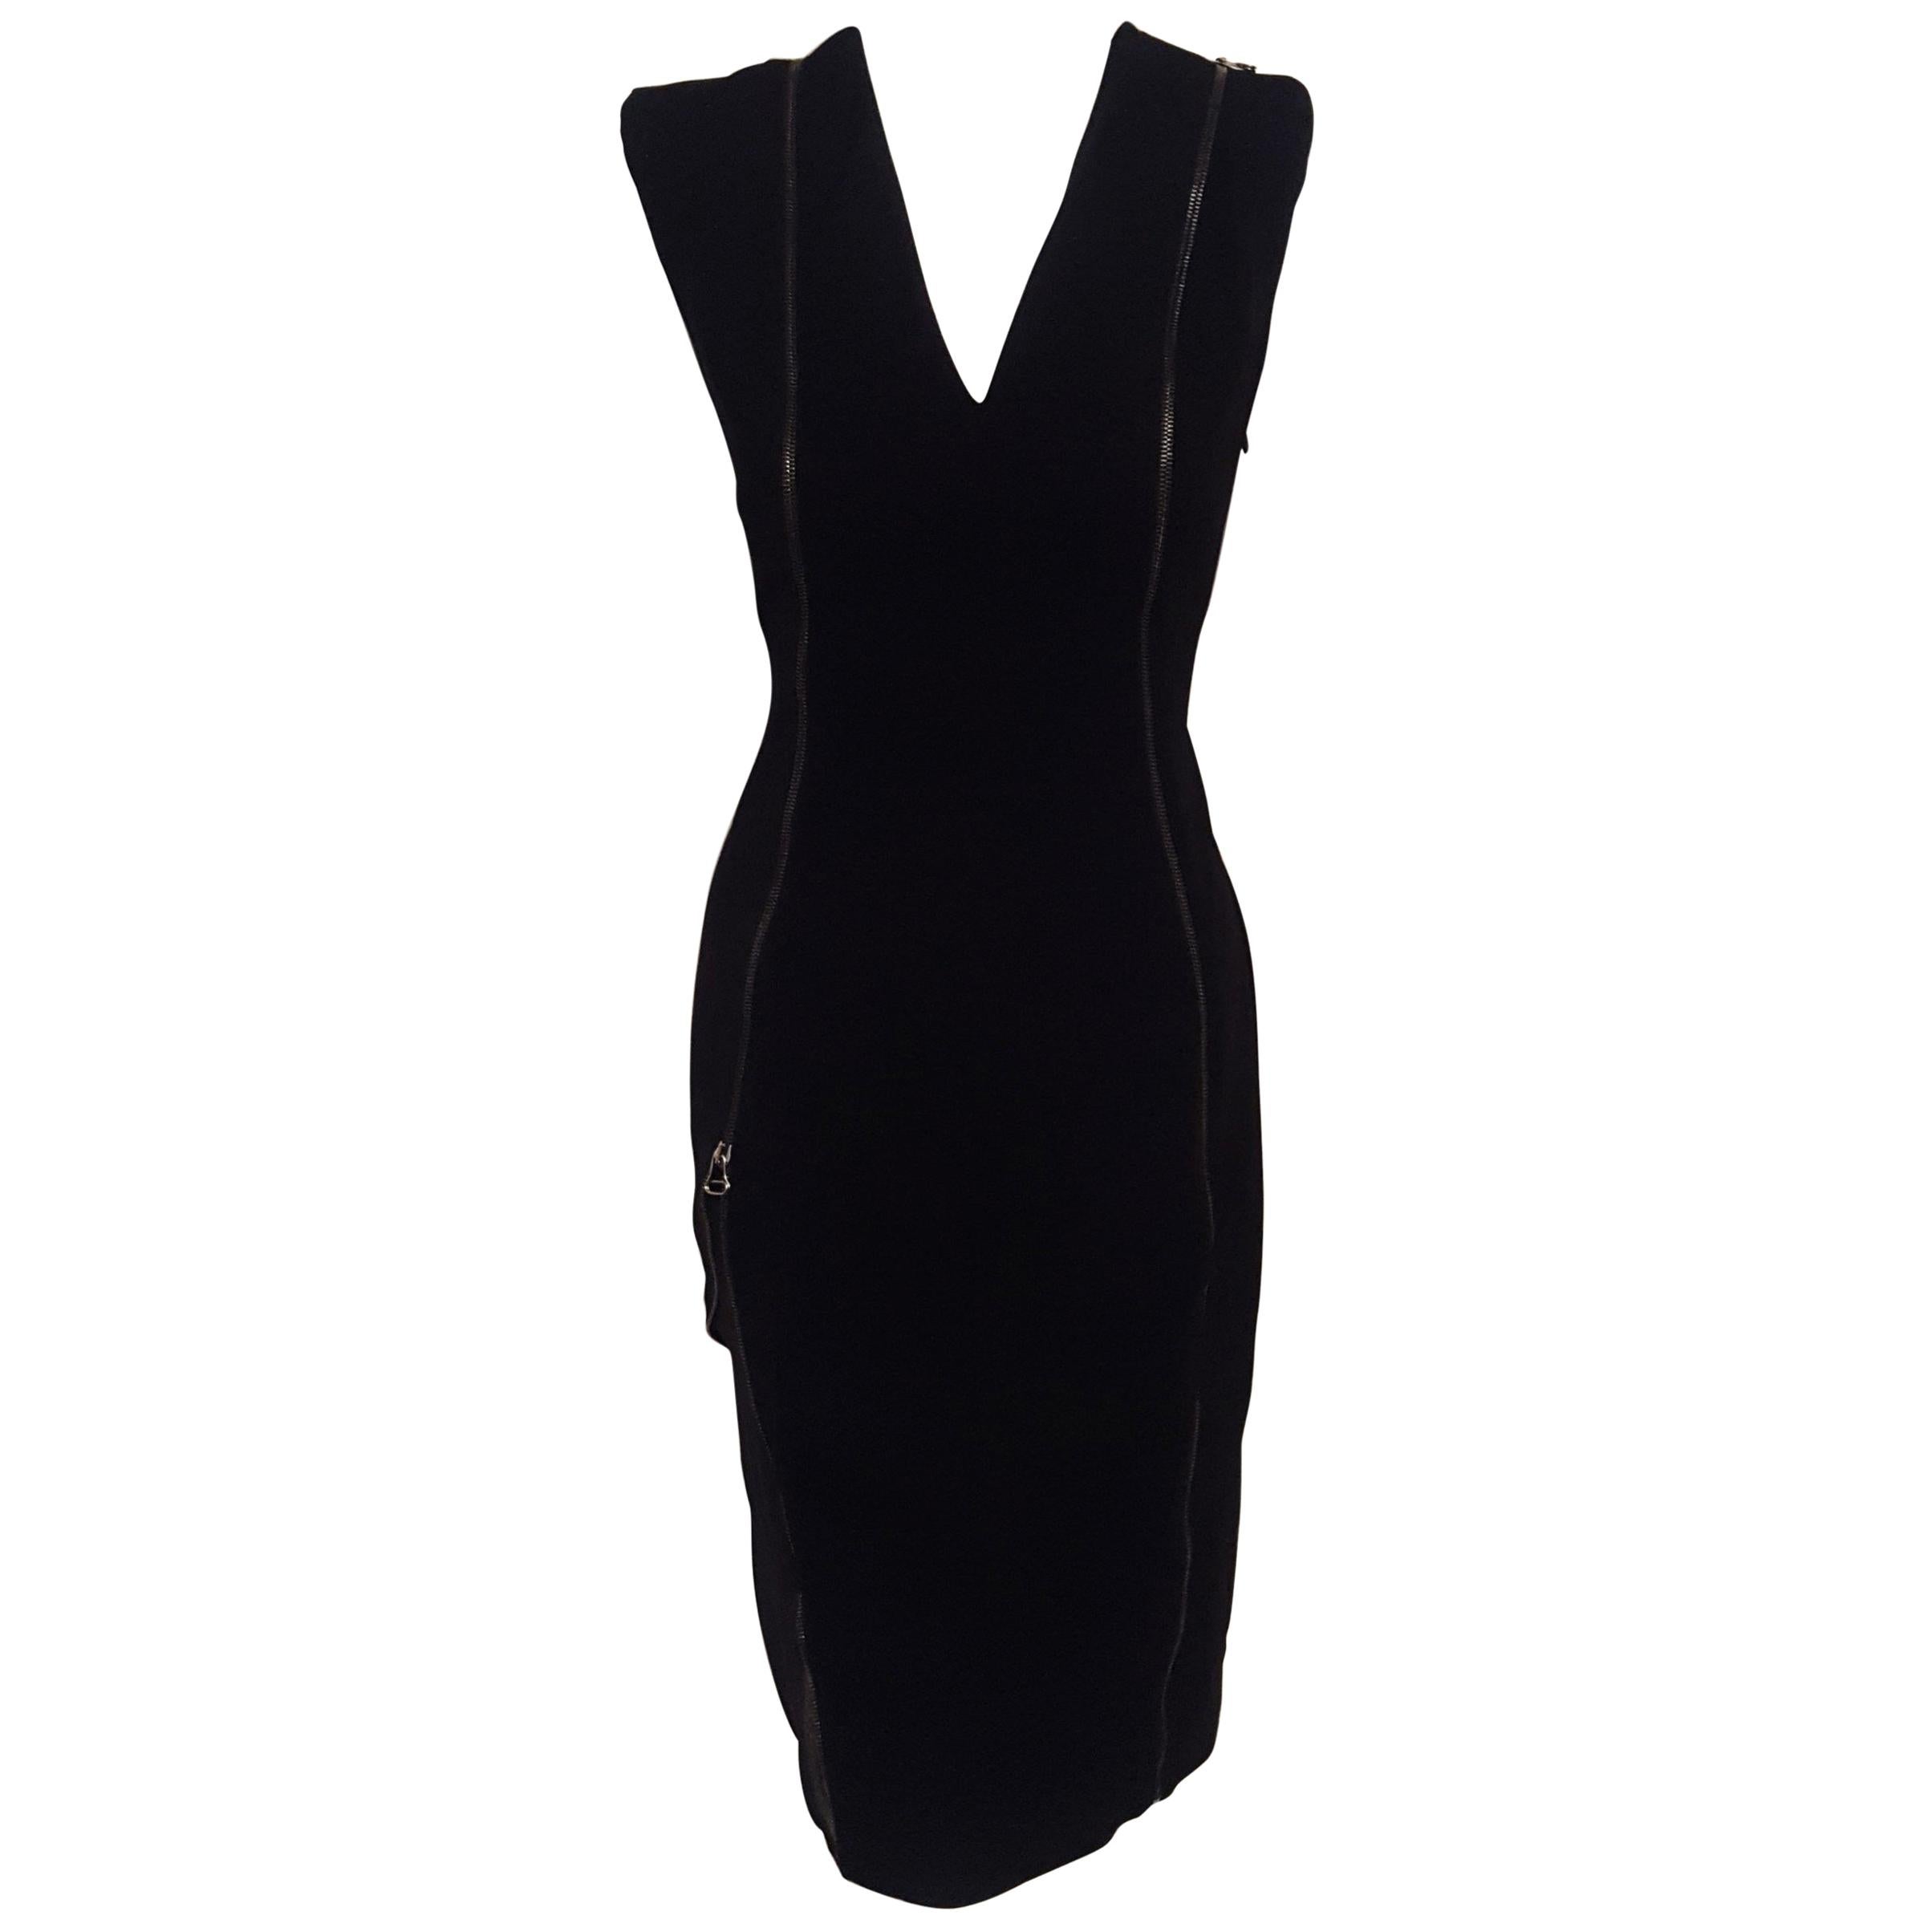 Altuzarra Black Dress With Faux Zippers and Cap Sleeves 42 EU For Sale